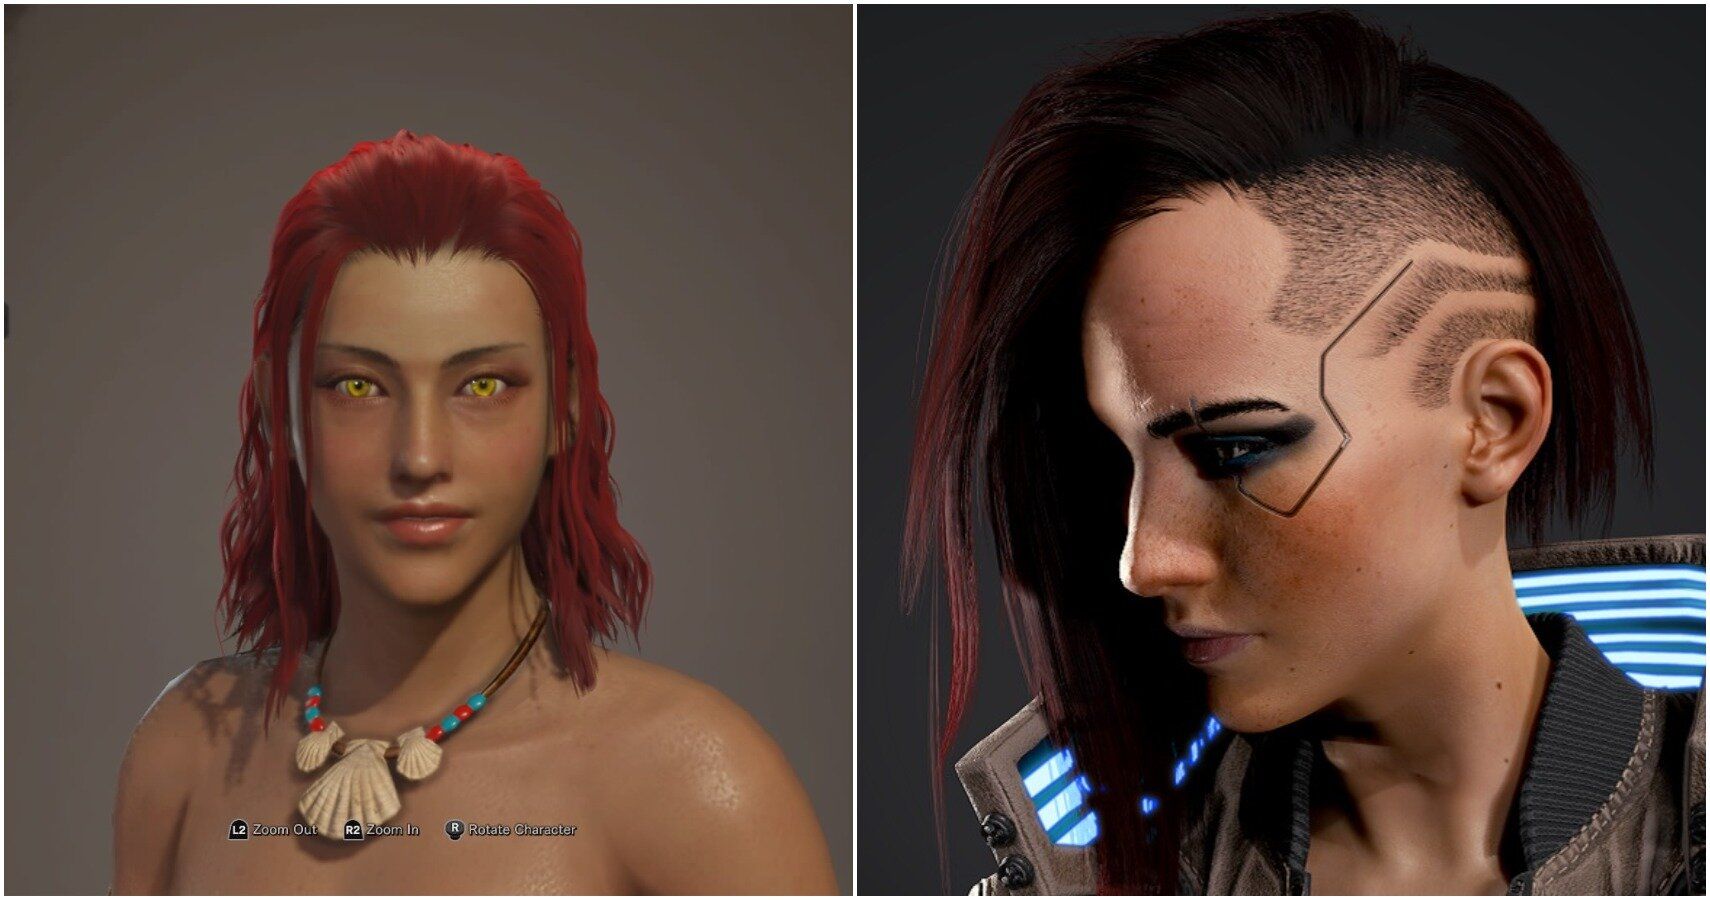 Split image of Monster Hunter and Cyberpunk 2077 characters.